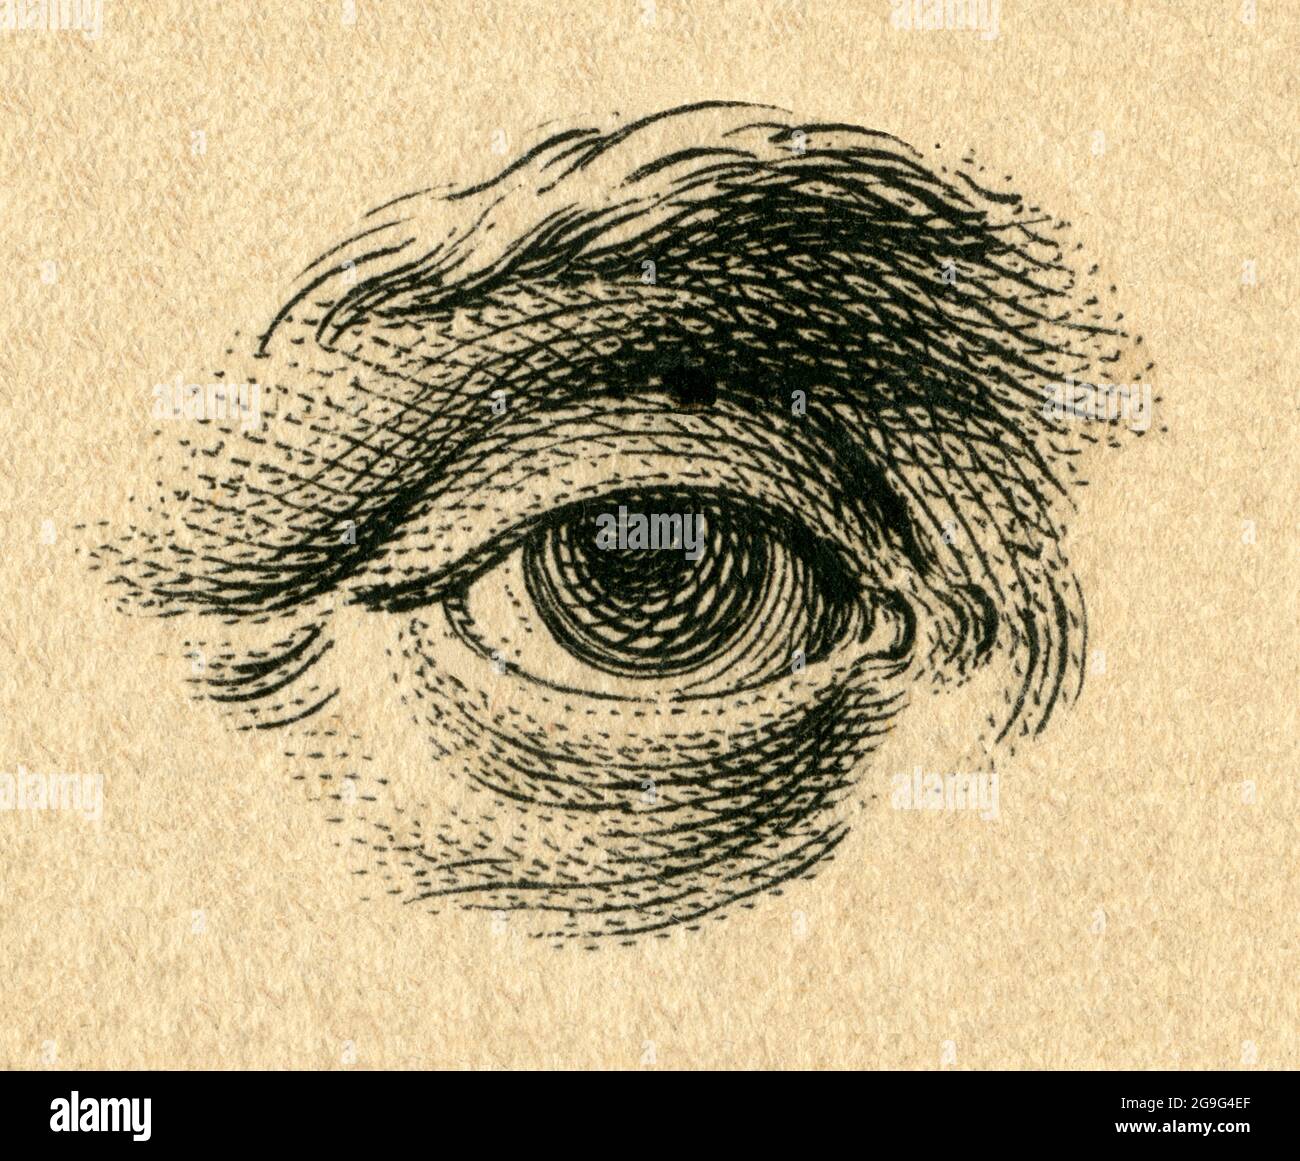 Europe, Germany, Bavaria, Augsburg, graphic of an eye, copperplate engraving by Johann Martin Will, ARTIST'S COPYRIGHT HAS NOT TO BE CLEARED Stock Photo